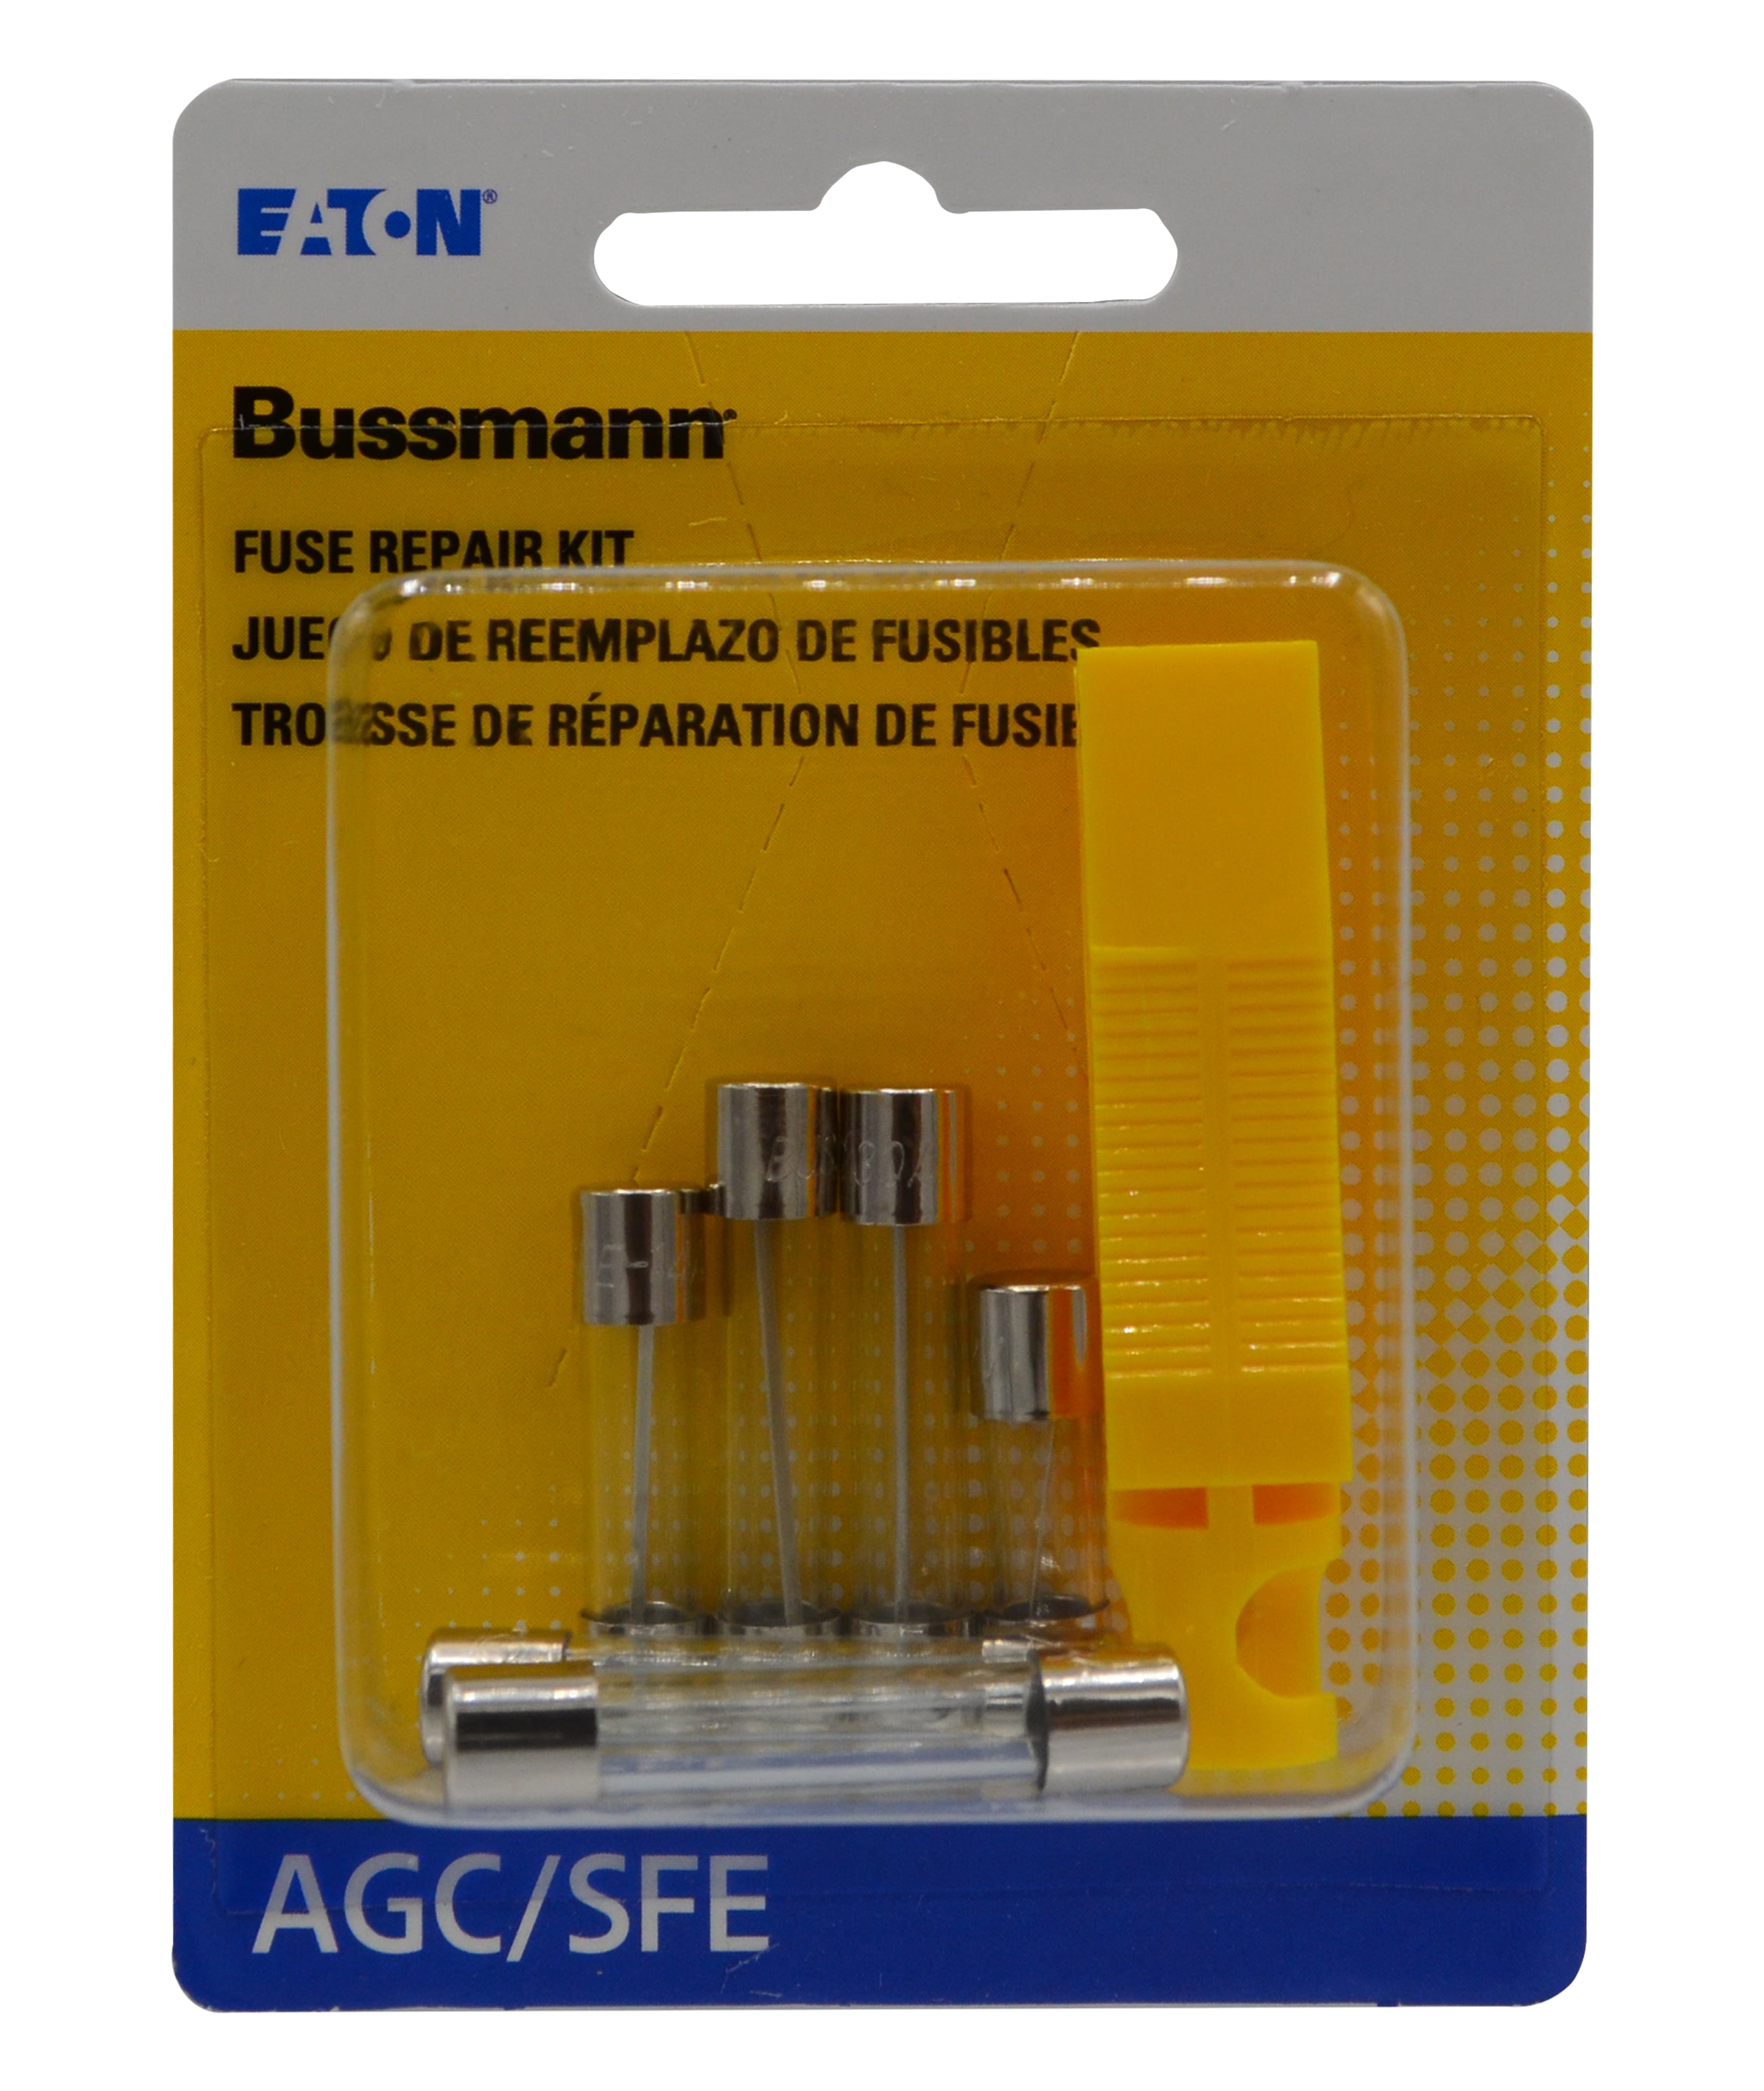 Lot of 10 Buss SFE14 32V 14 Amp Fast Blow Glass Fuse 2 Boxes of 5 Bussmann